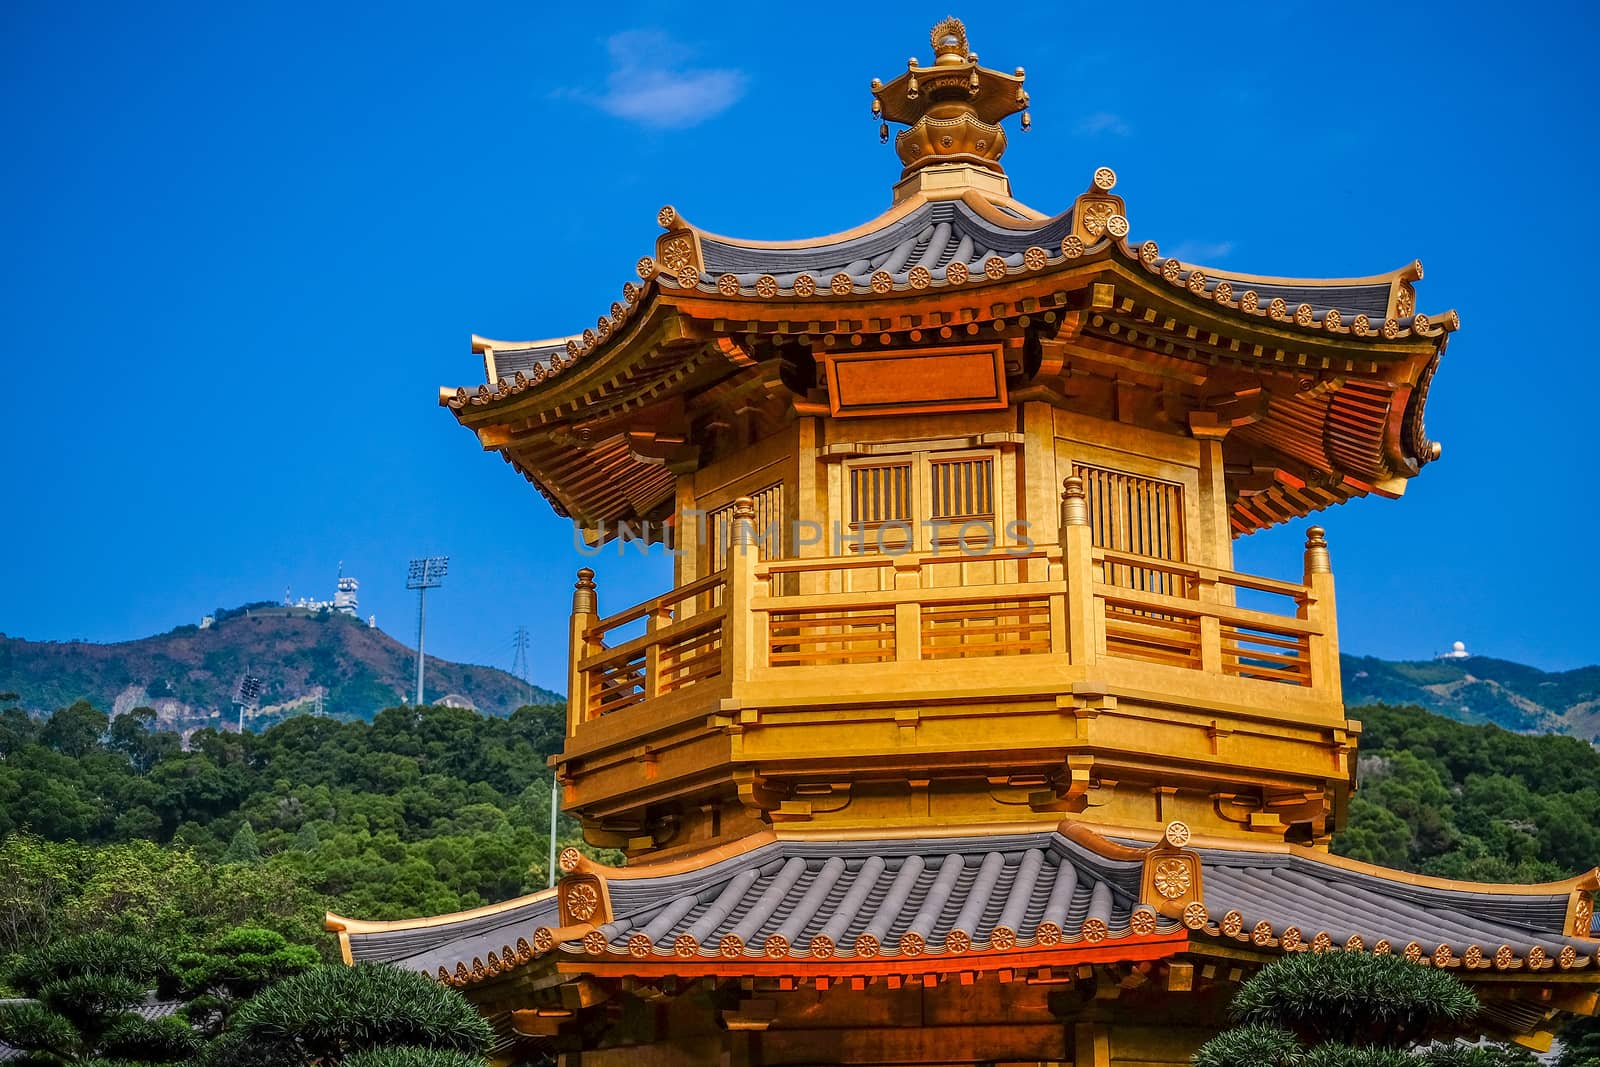 Front View The Golden Pavilion of Perfection in Nan Lian Garden by Surasak